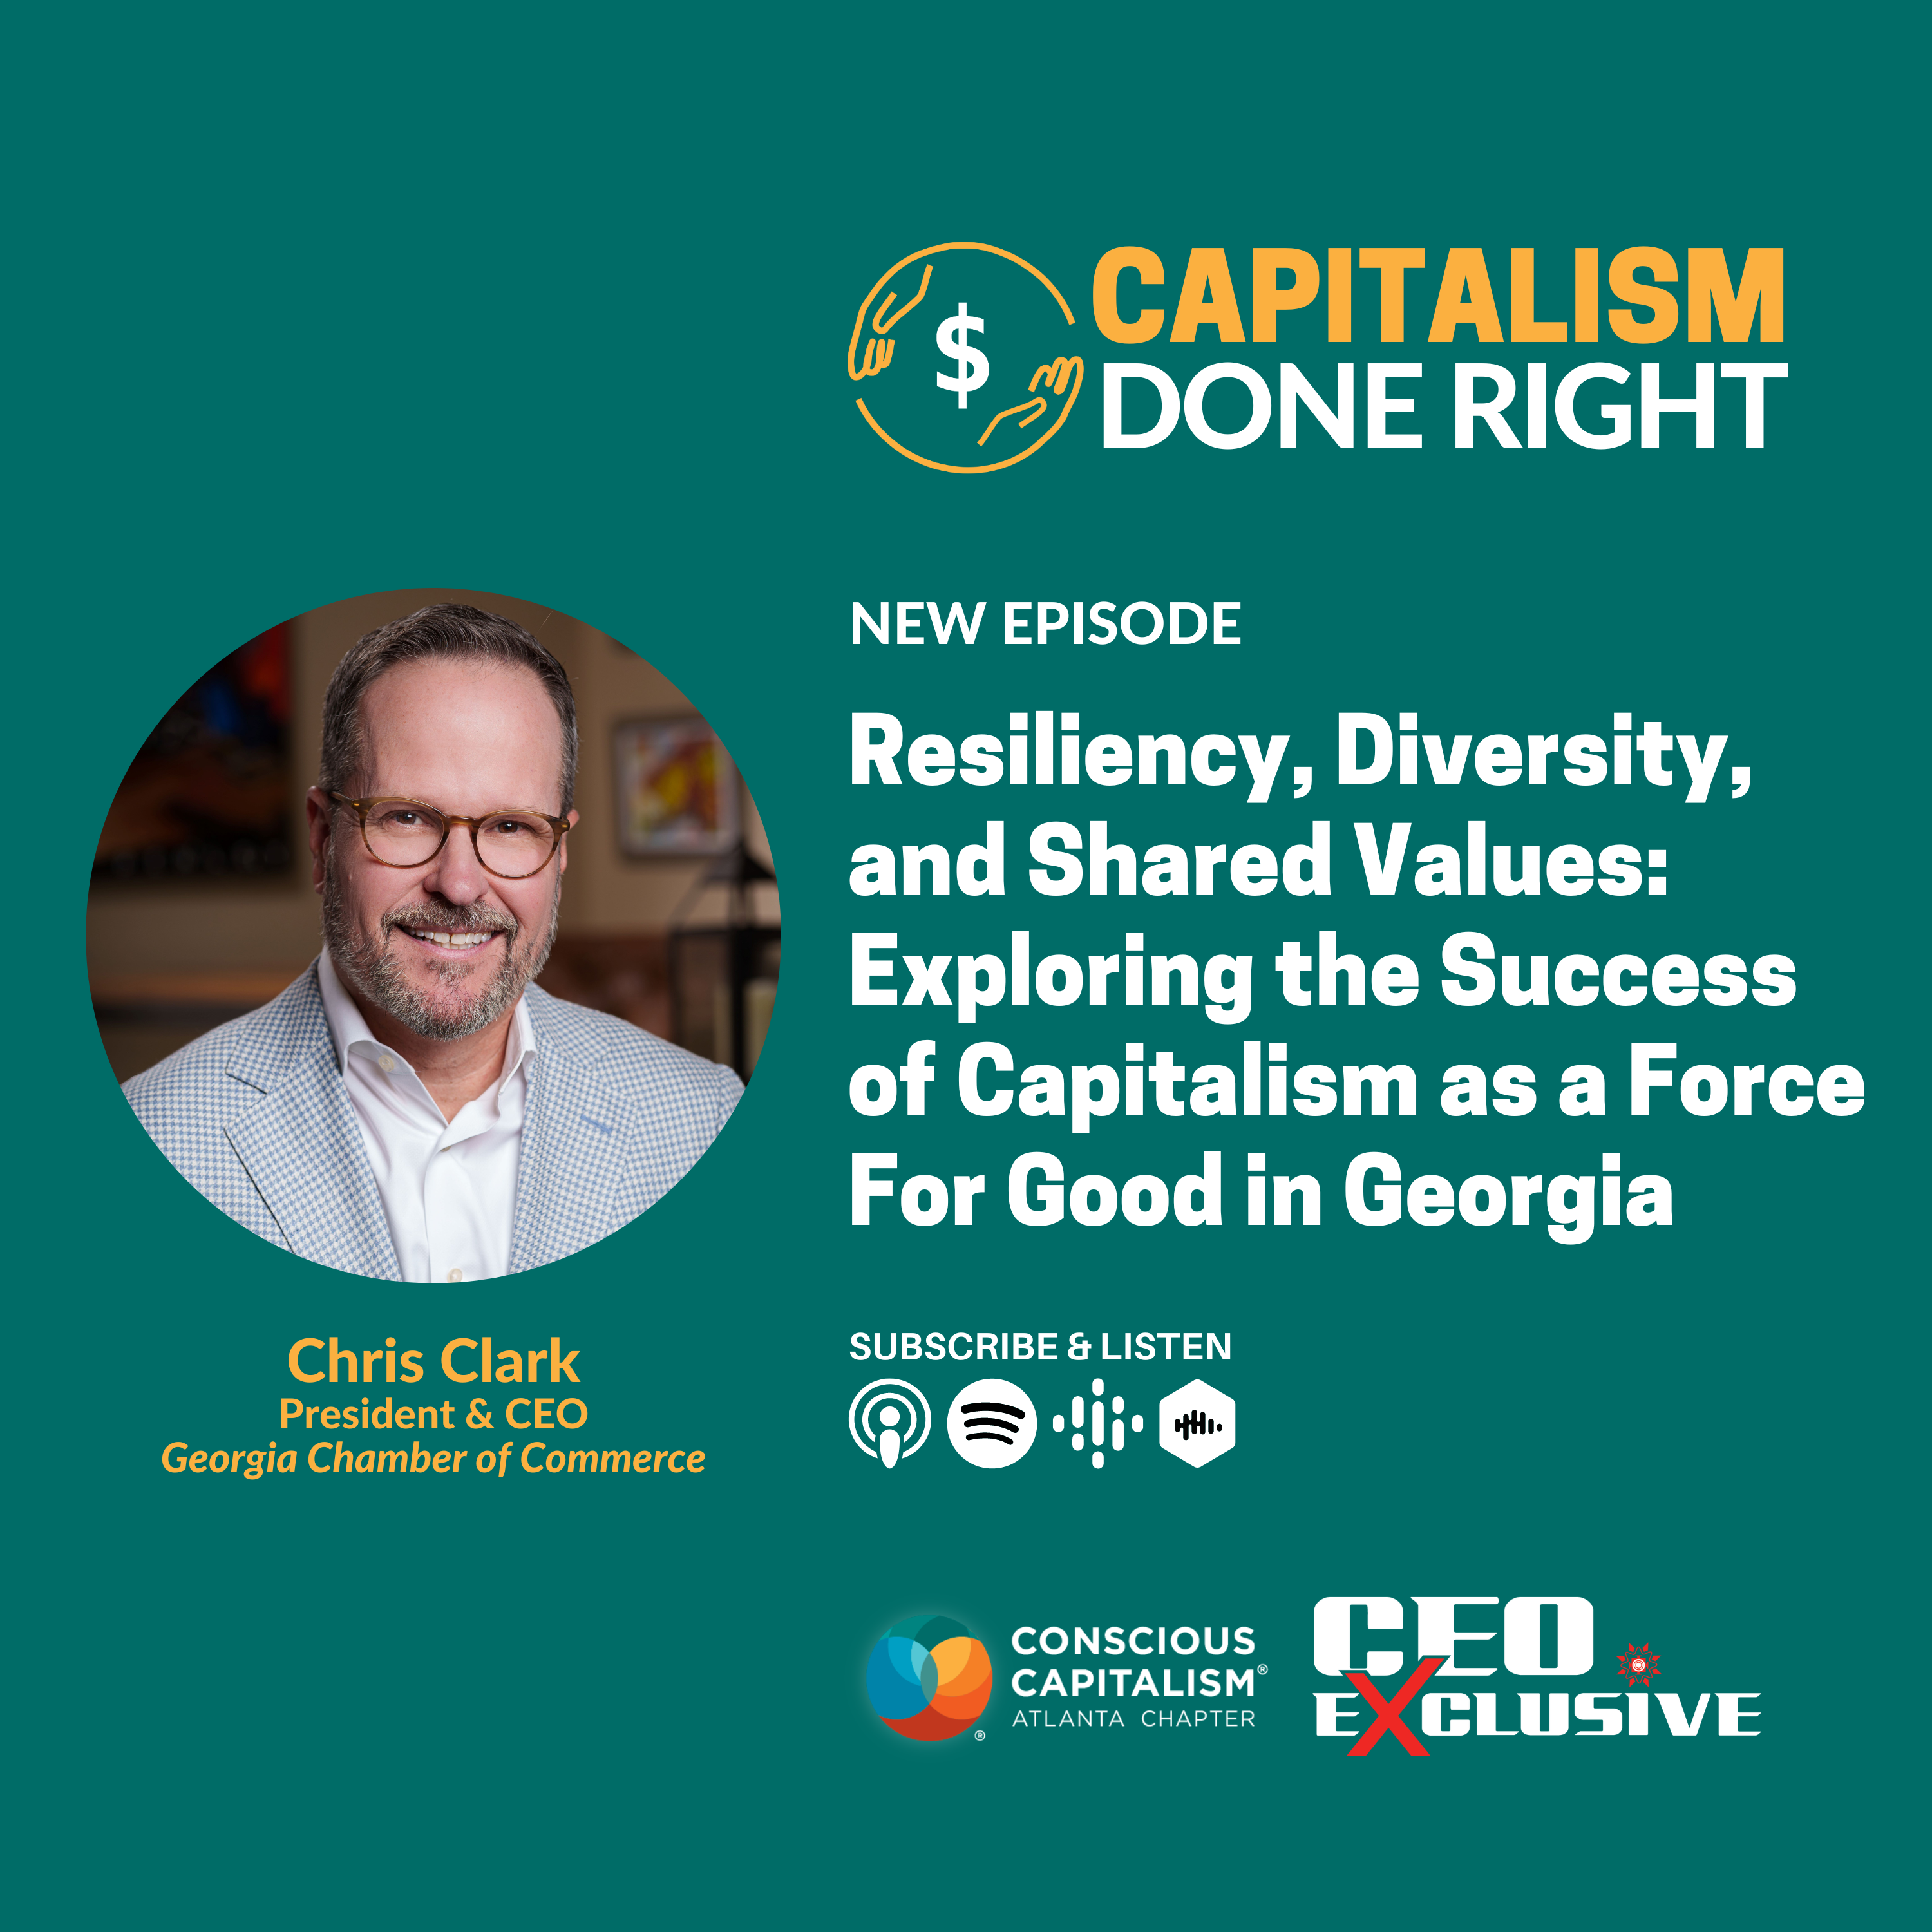 Resiliency, Diversity, and Shared Values: Exploring the Success of Capitalism as a Force For Good in Georgia